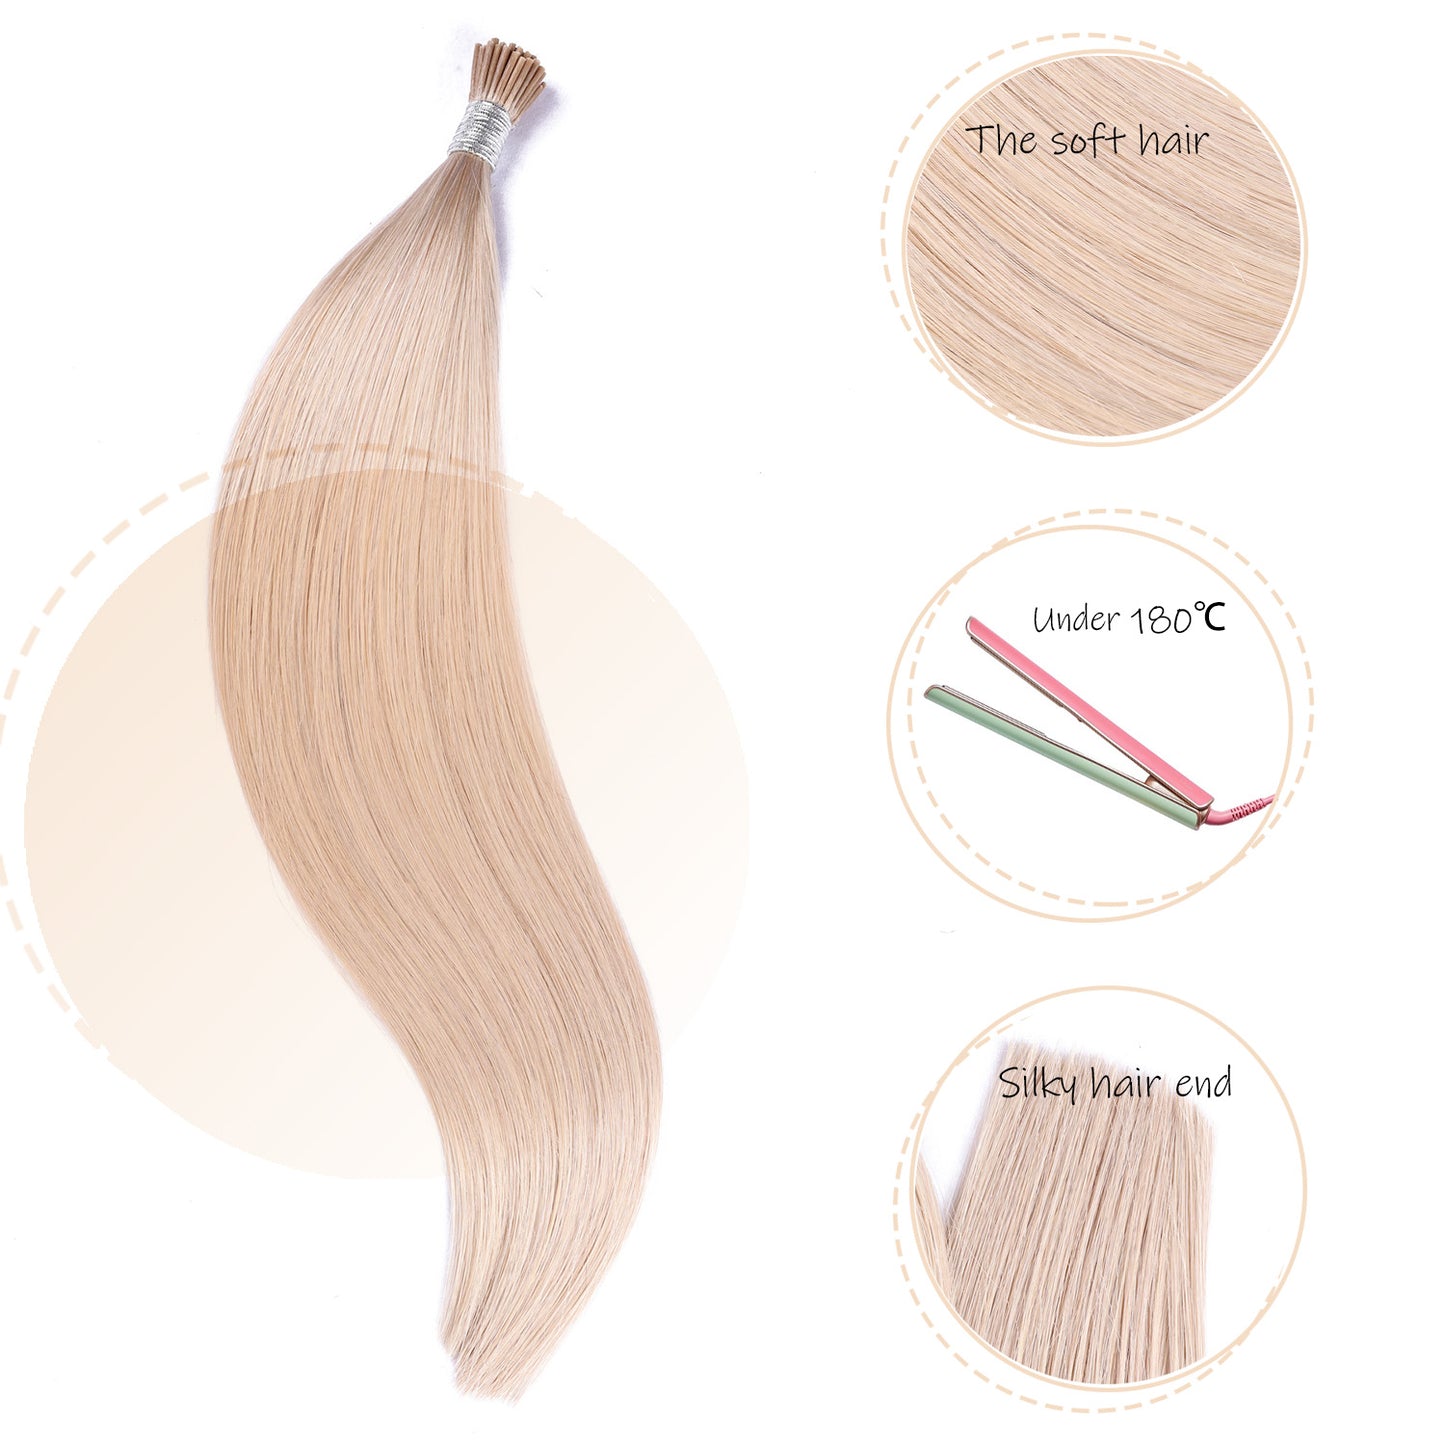 Eliysako I Tip Hair Extensions Human Hair,Cold Fusion Soft Abnormal Hair Extensions 70 Strands Pre Keratin Bonded, Itip Human Hair Extensions,50g/Pack